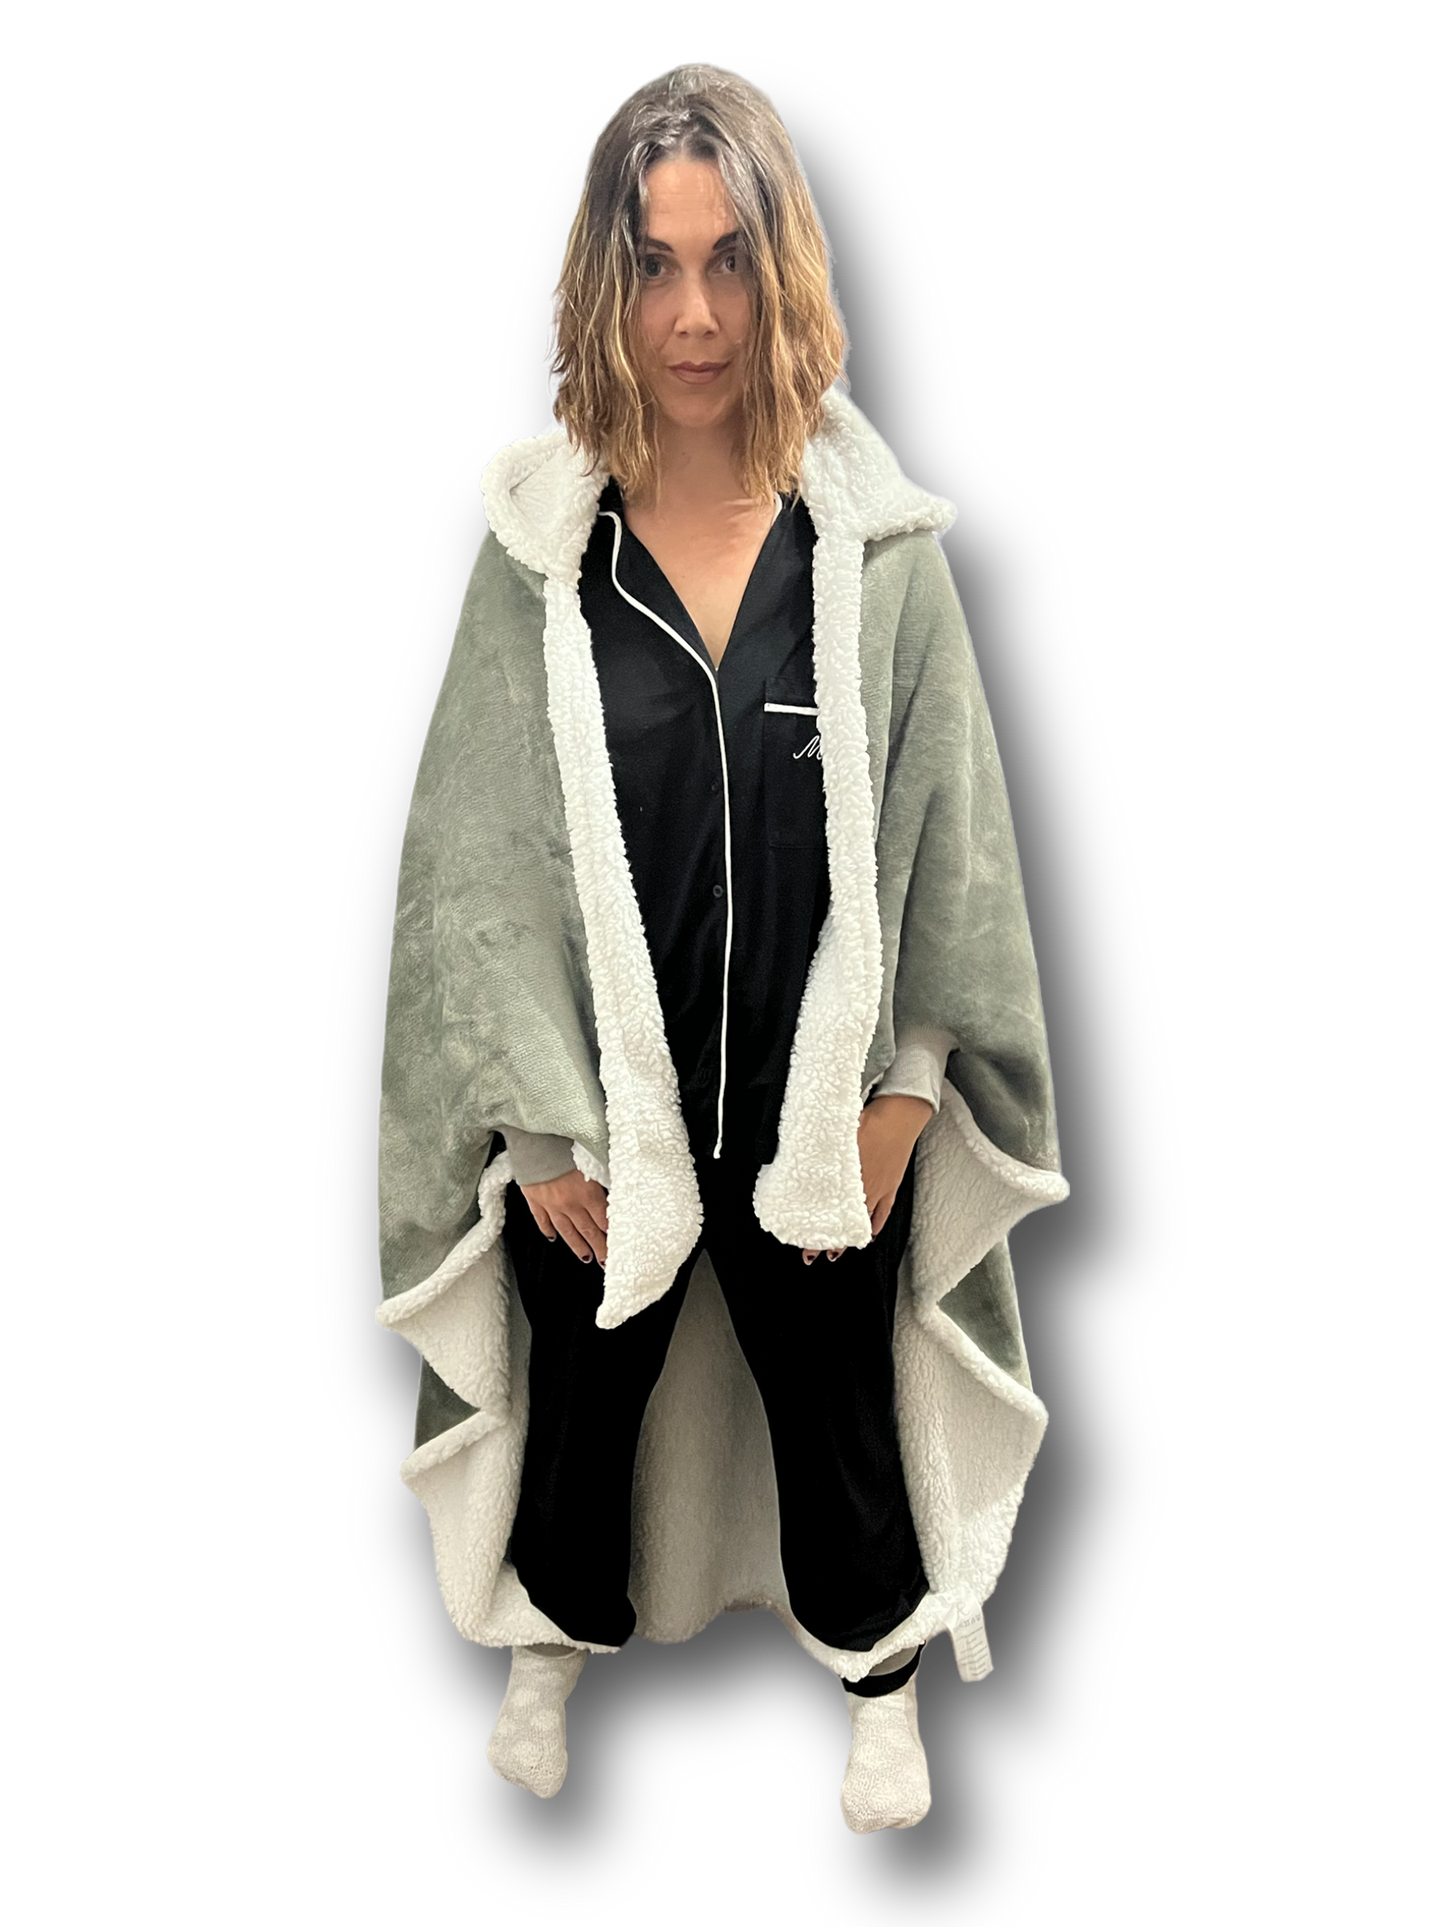 CwtchCape Sherpa fleece hoodie walkie blanket Adult 1 size fits all - 4 Colours